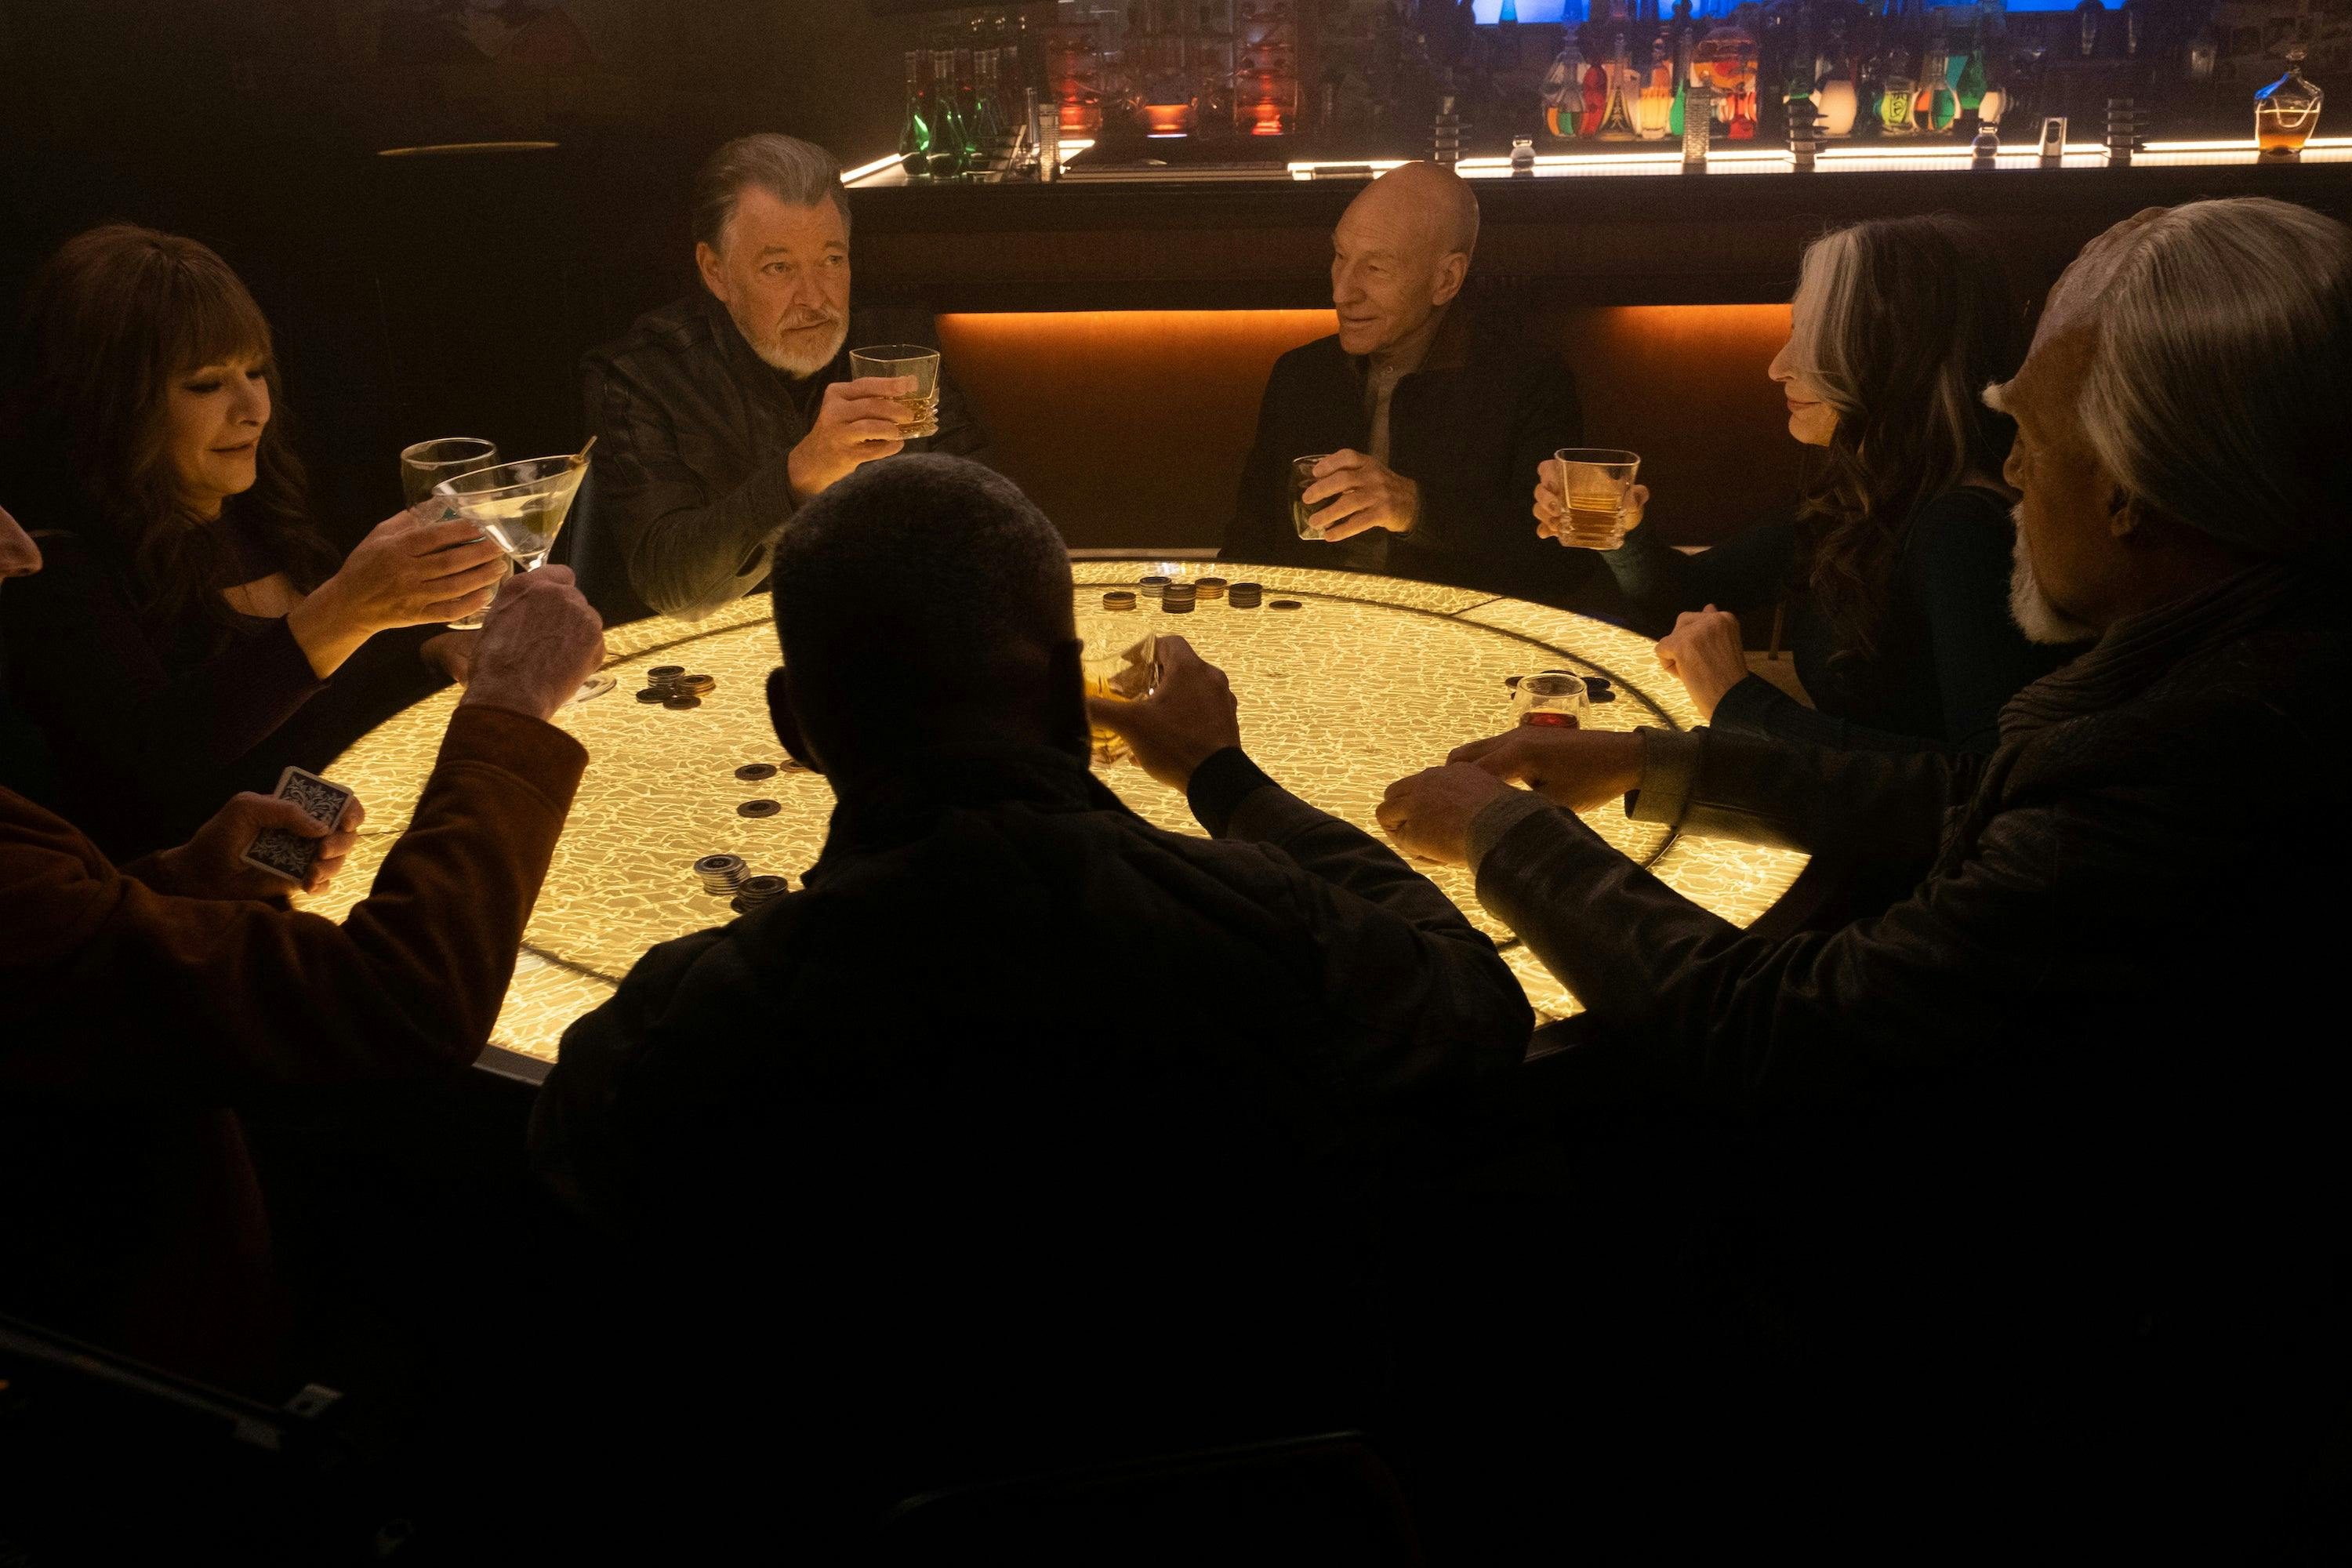 The original Enterprise-D crew (Deanna, Riker, Picard, Beverly, Worf, Geordi, and Data) sit around the poker table while raising a glass in 'The Last Generation'